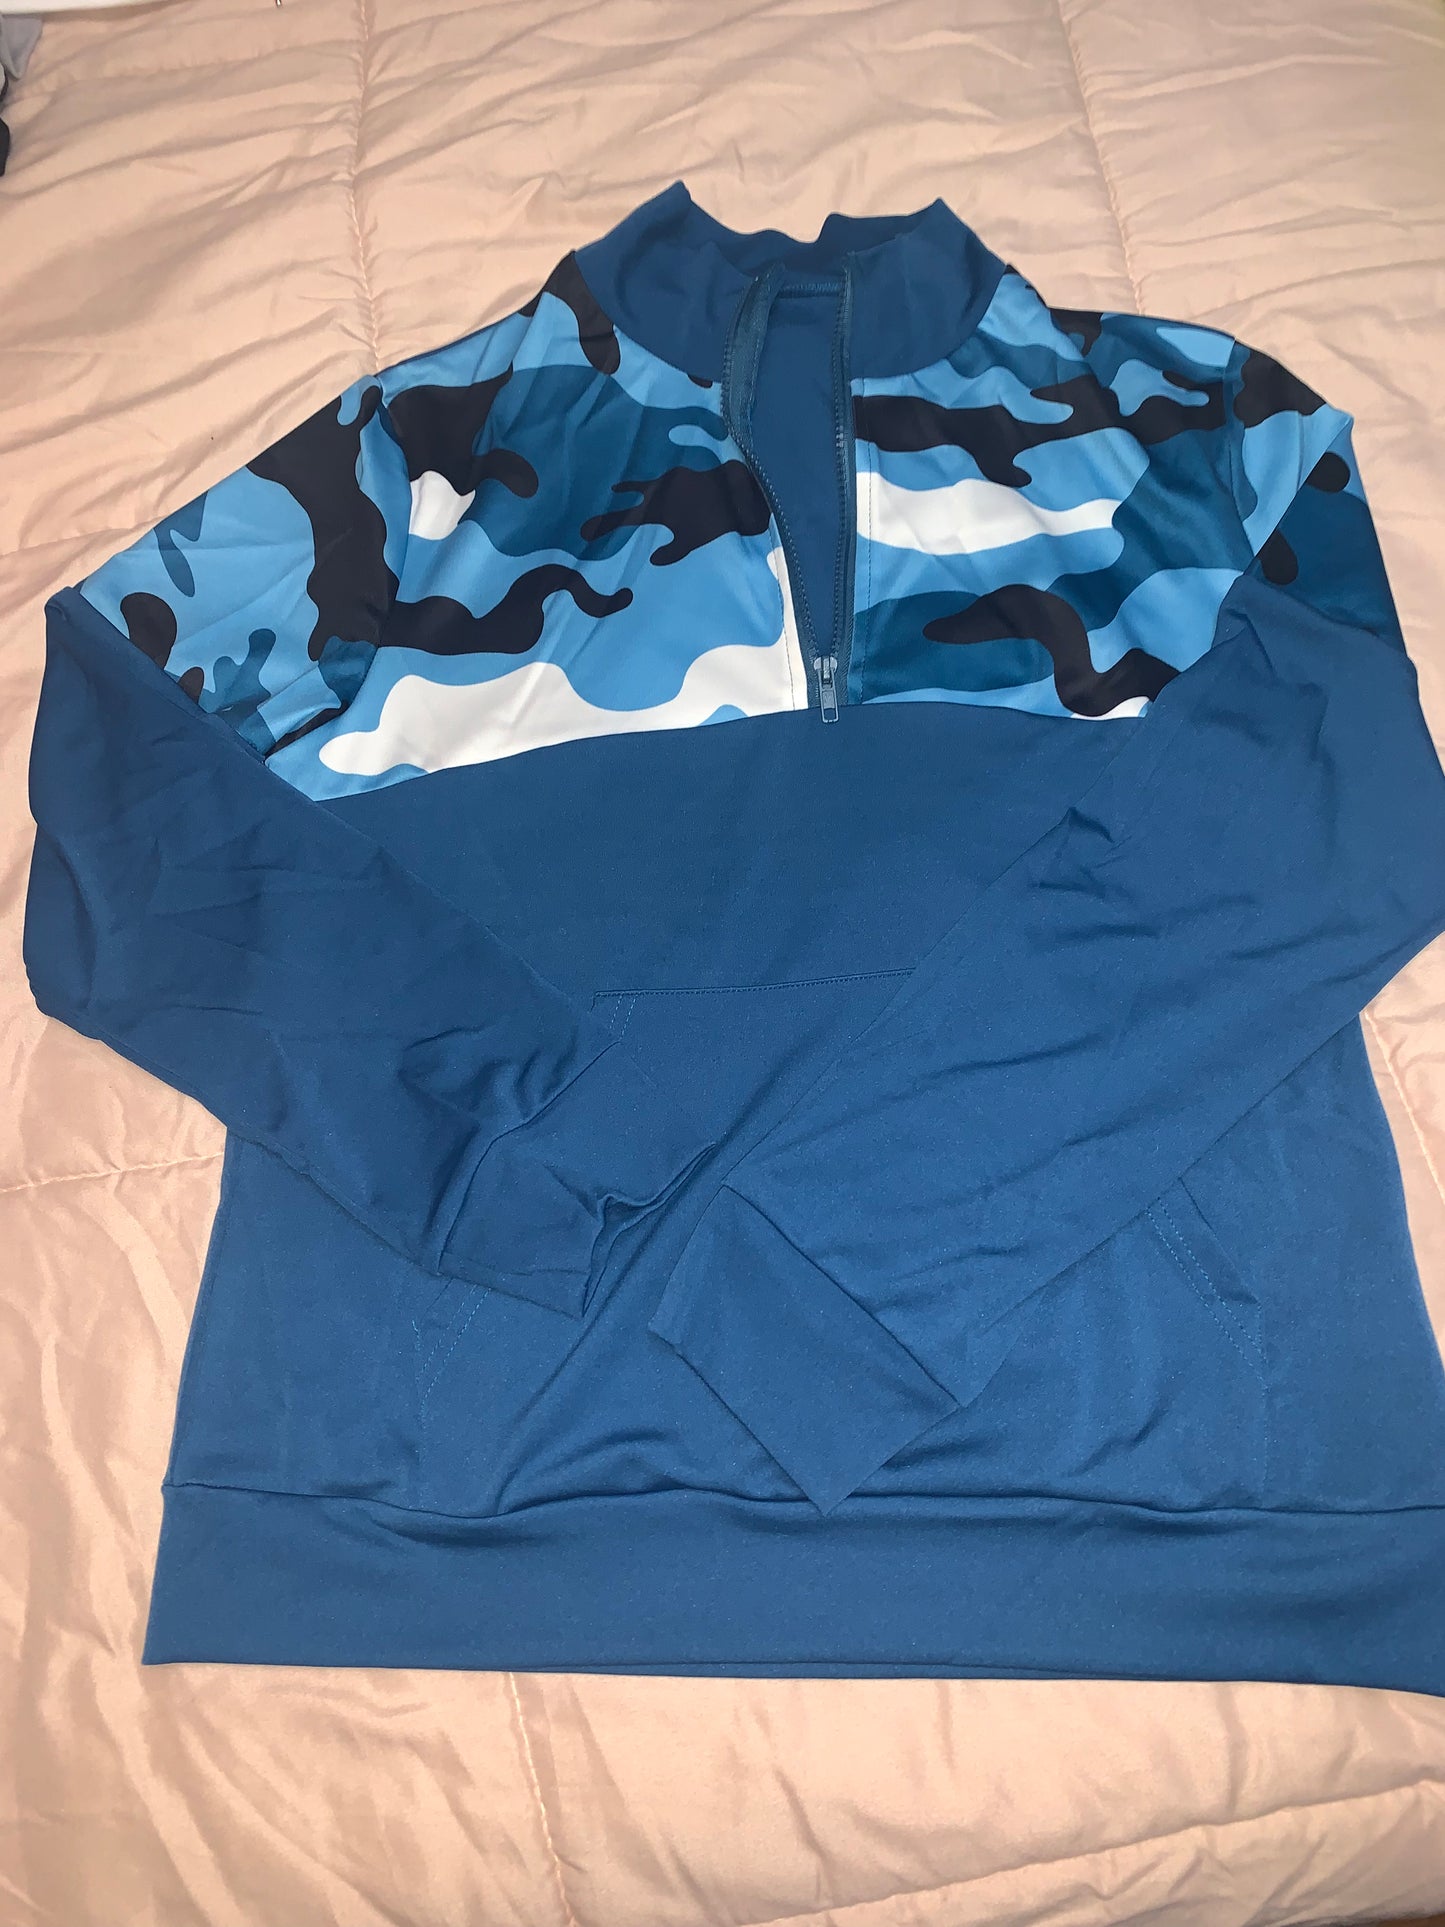 Large Blue Camo Pullover and Pants Set